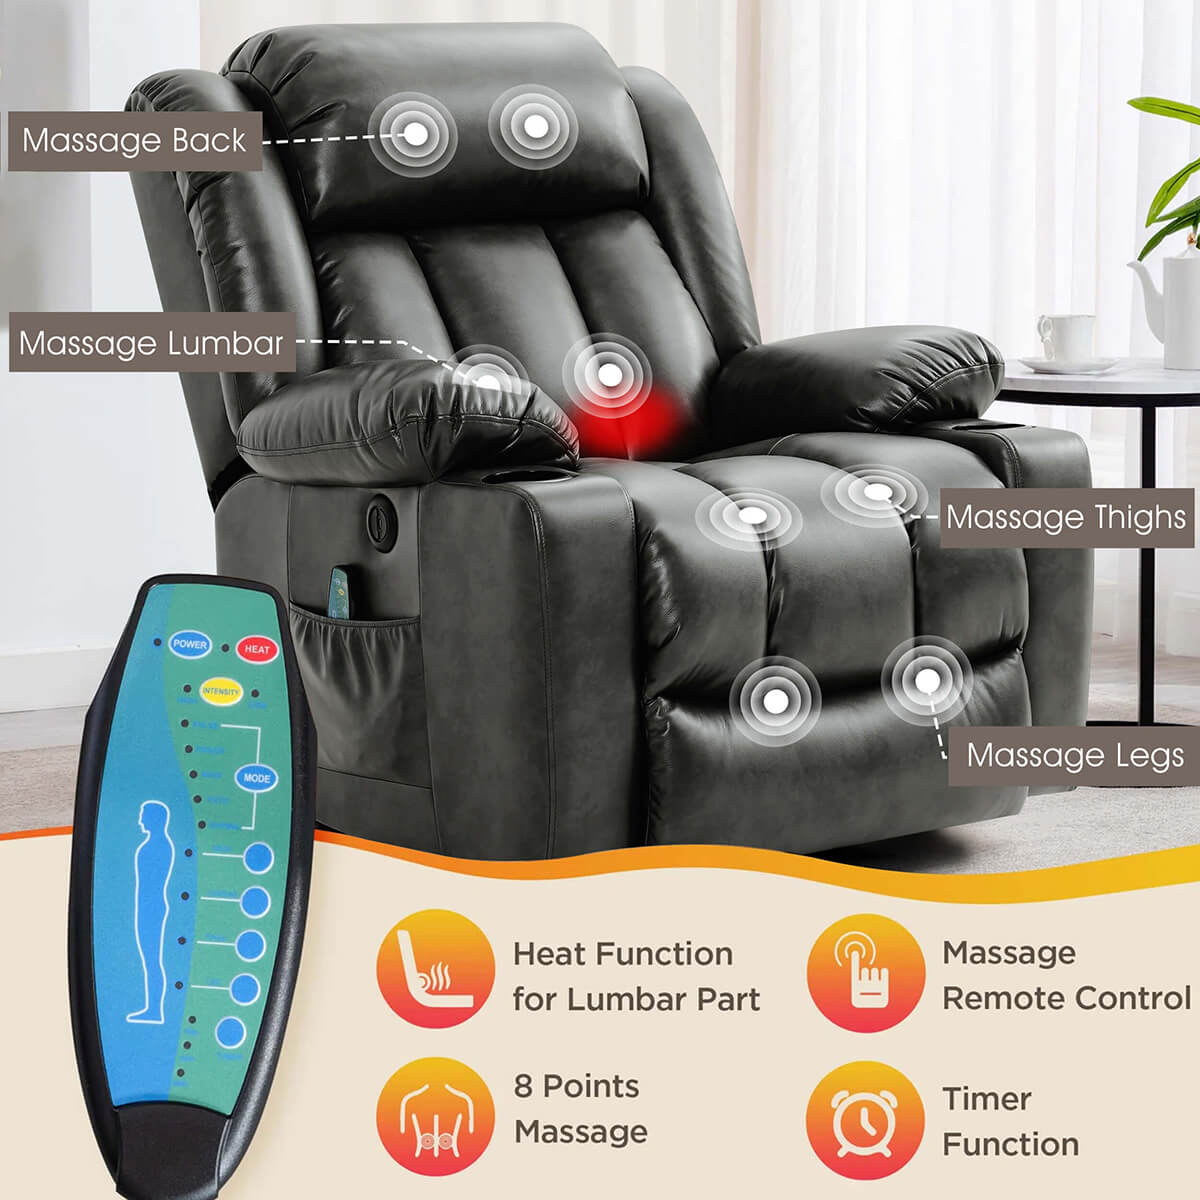 Luxury Lift Recliner Chairs With Massage and Heating